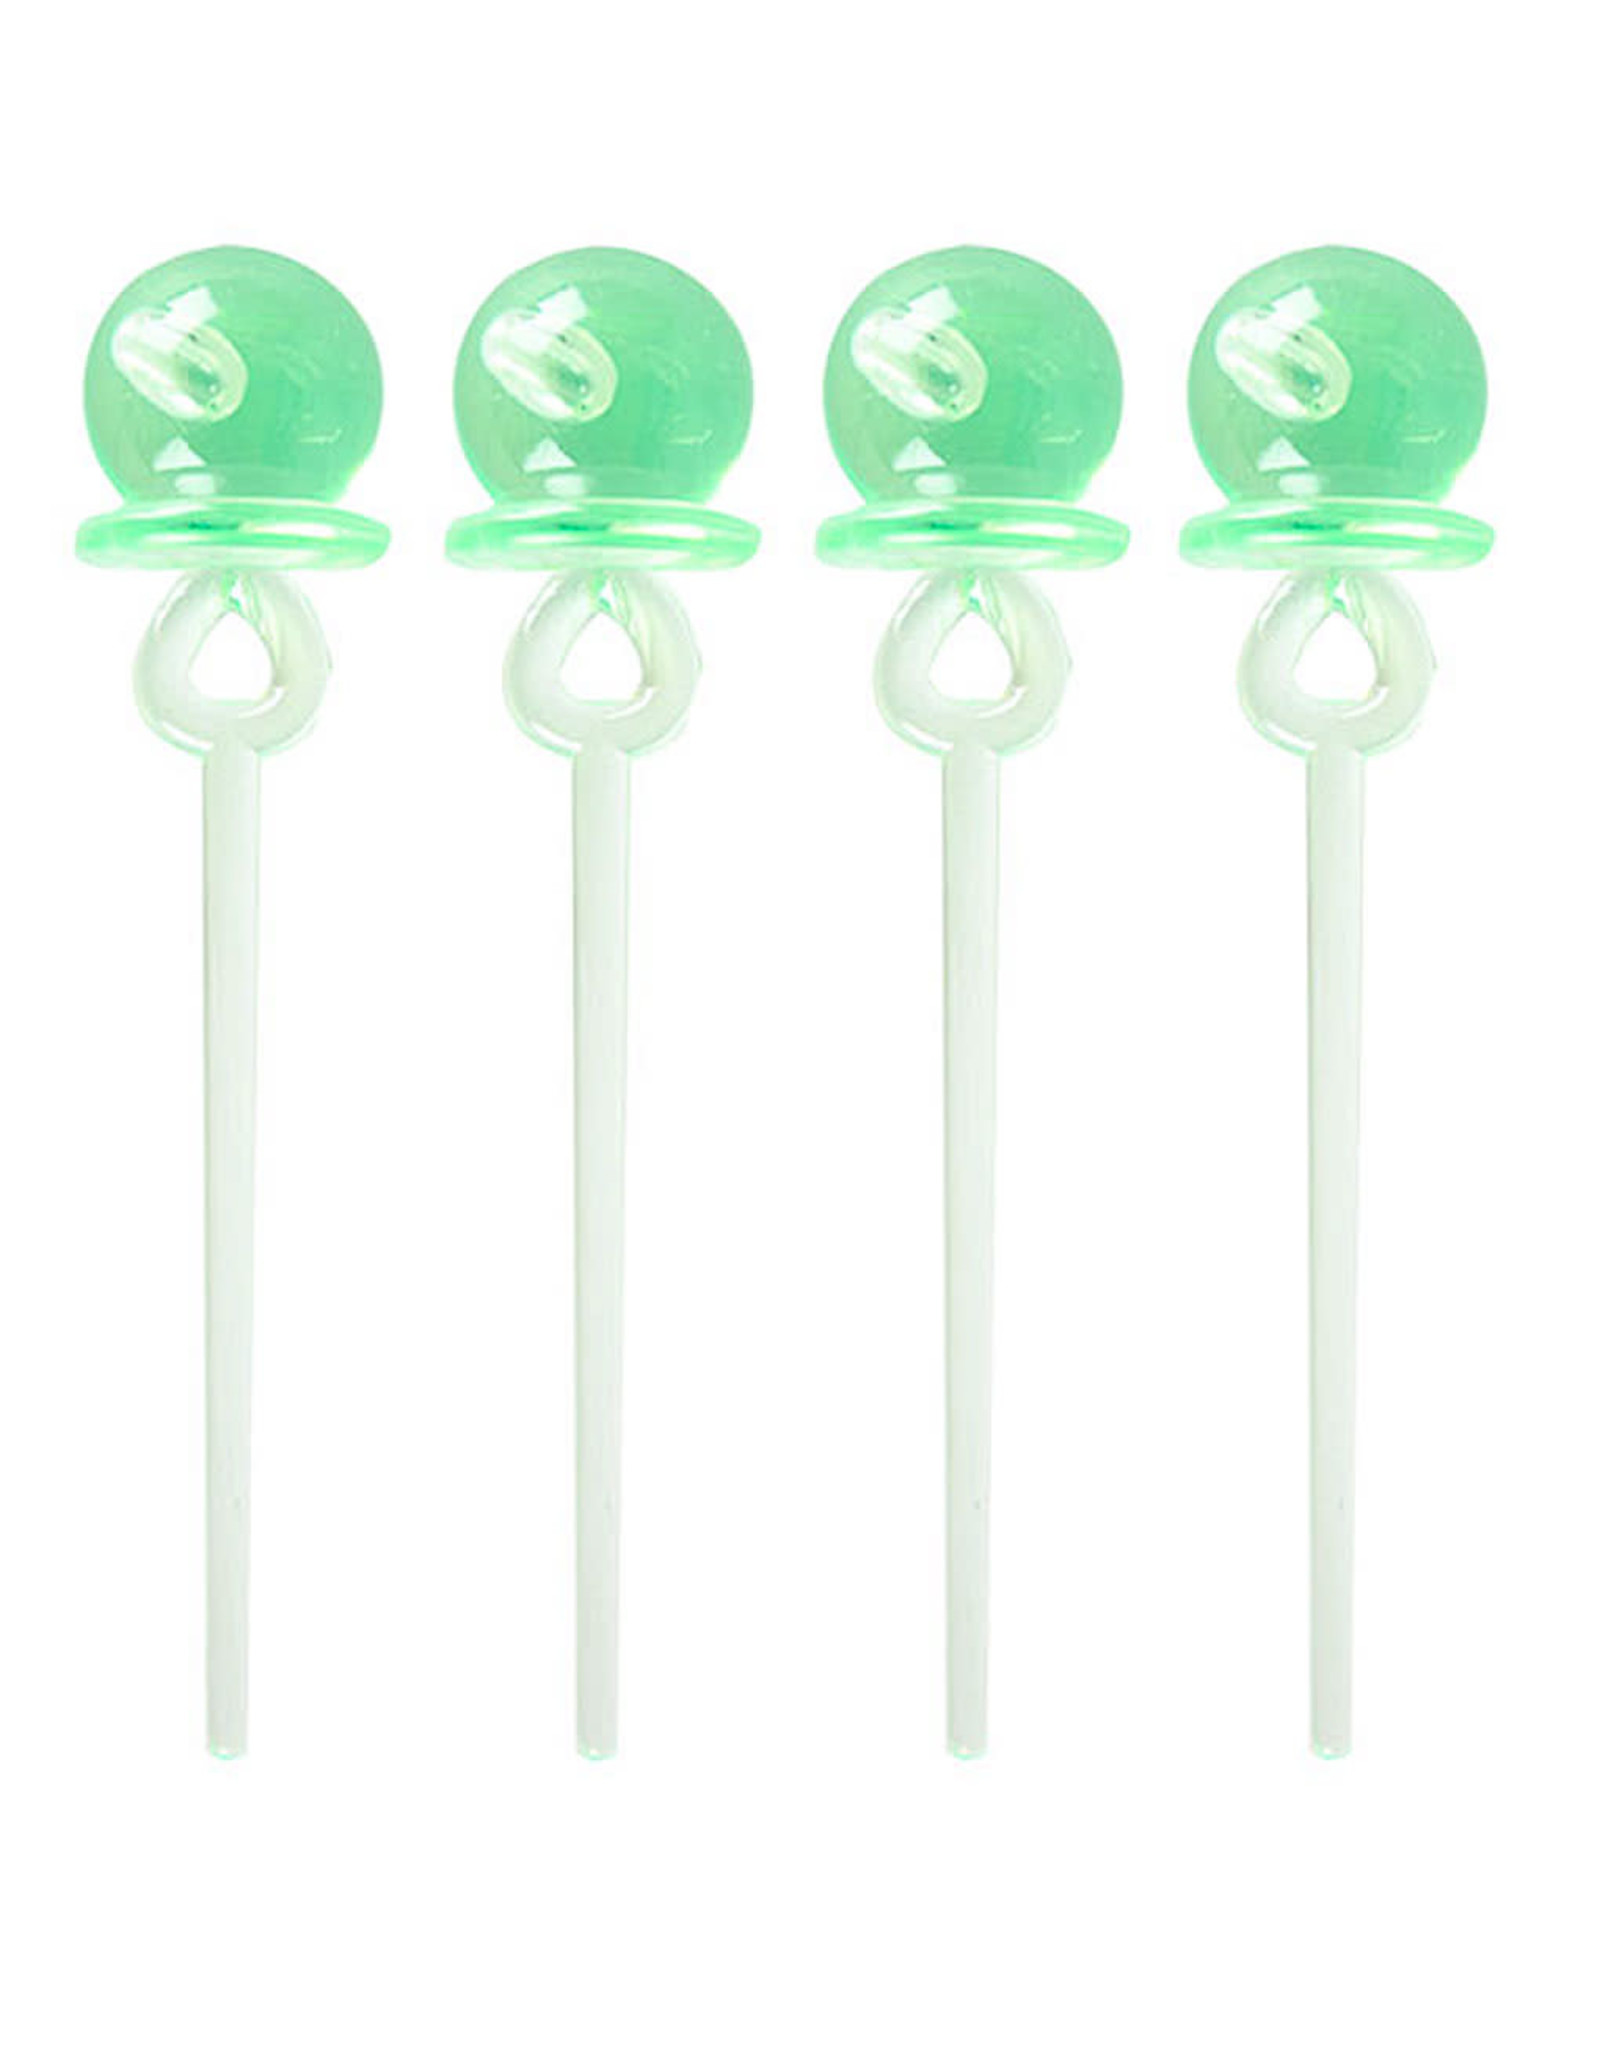 Papyrus Cupcake Baby Shower Party Picks 12pk Pacifiers